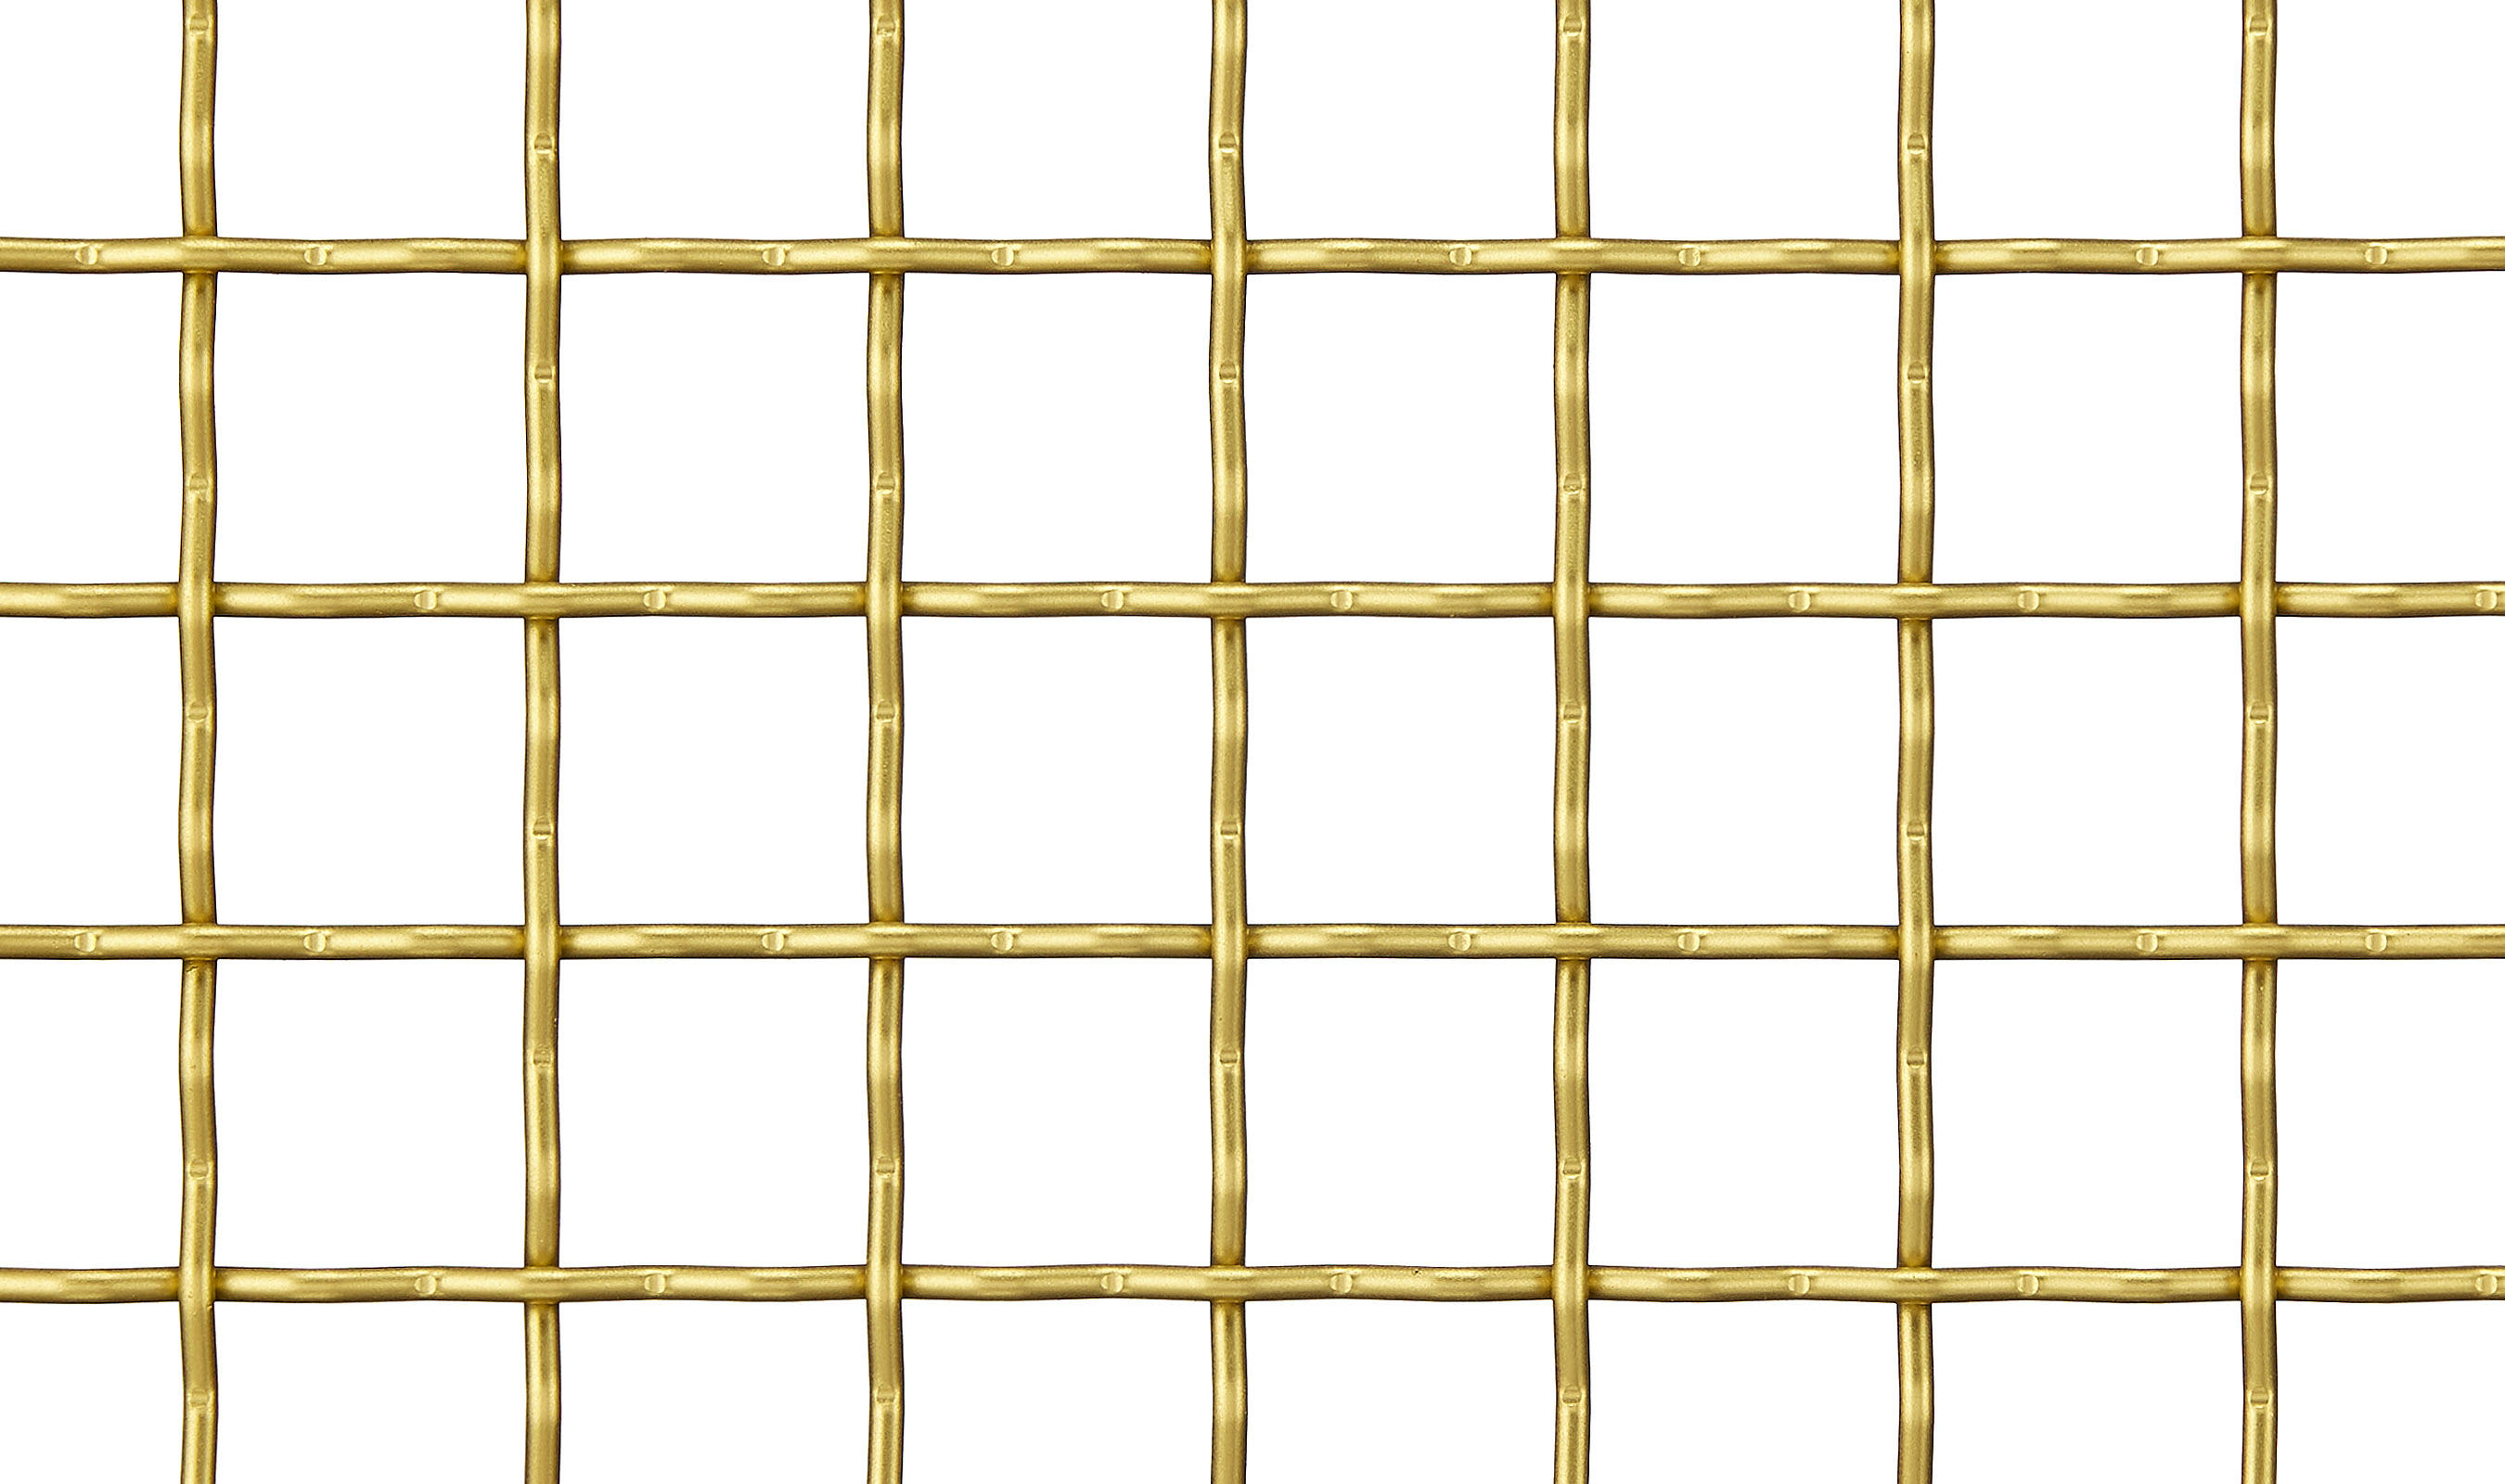 Wire Mesh Brass Architectural Woven style B Satin 